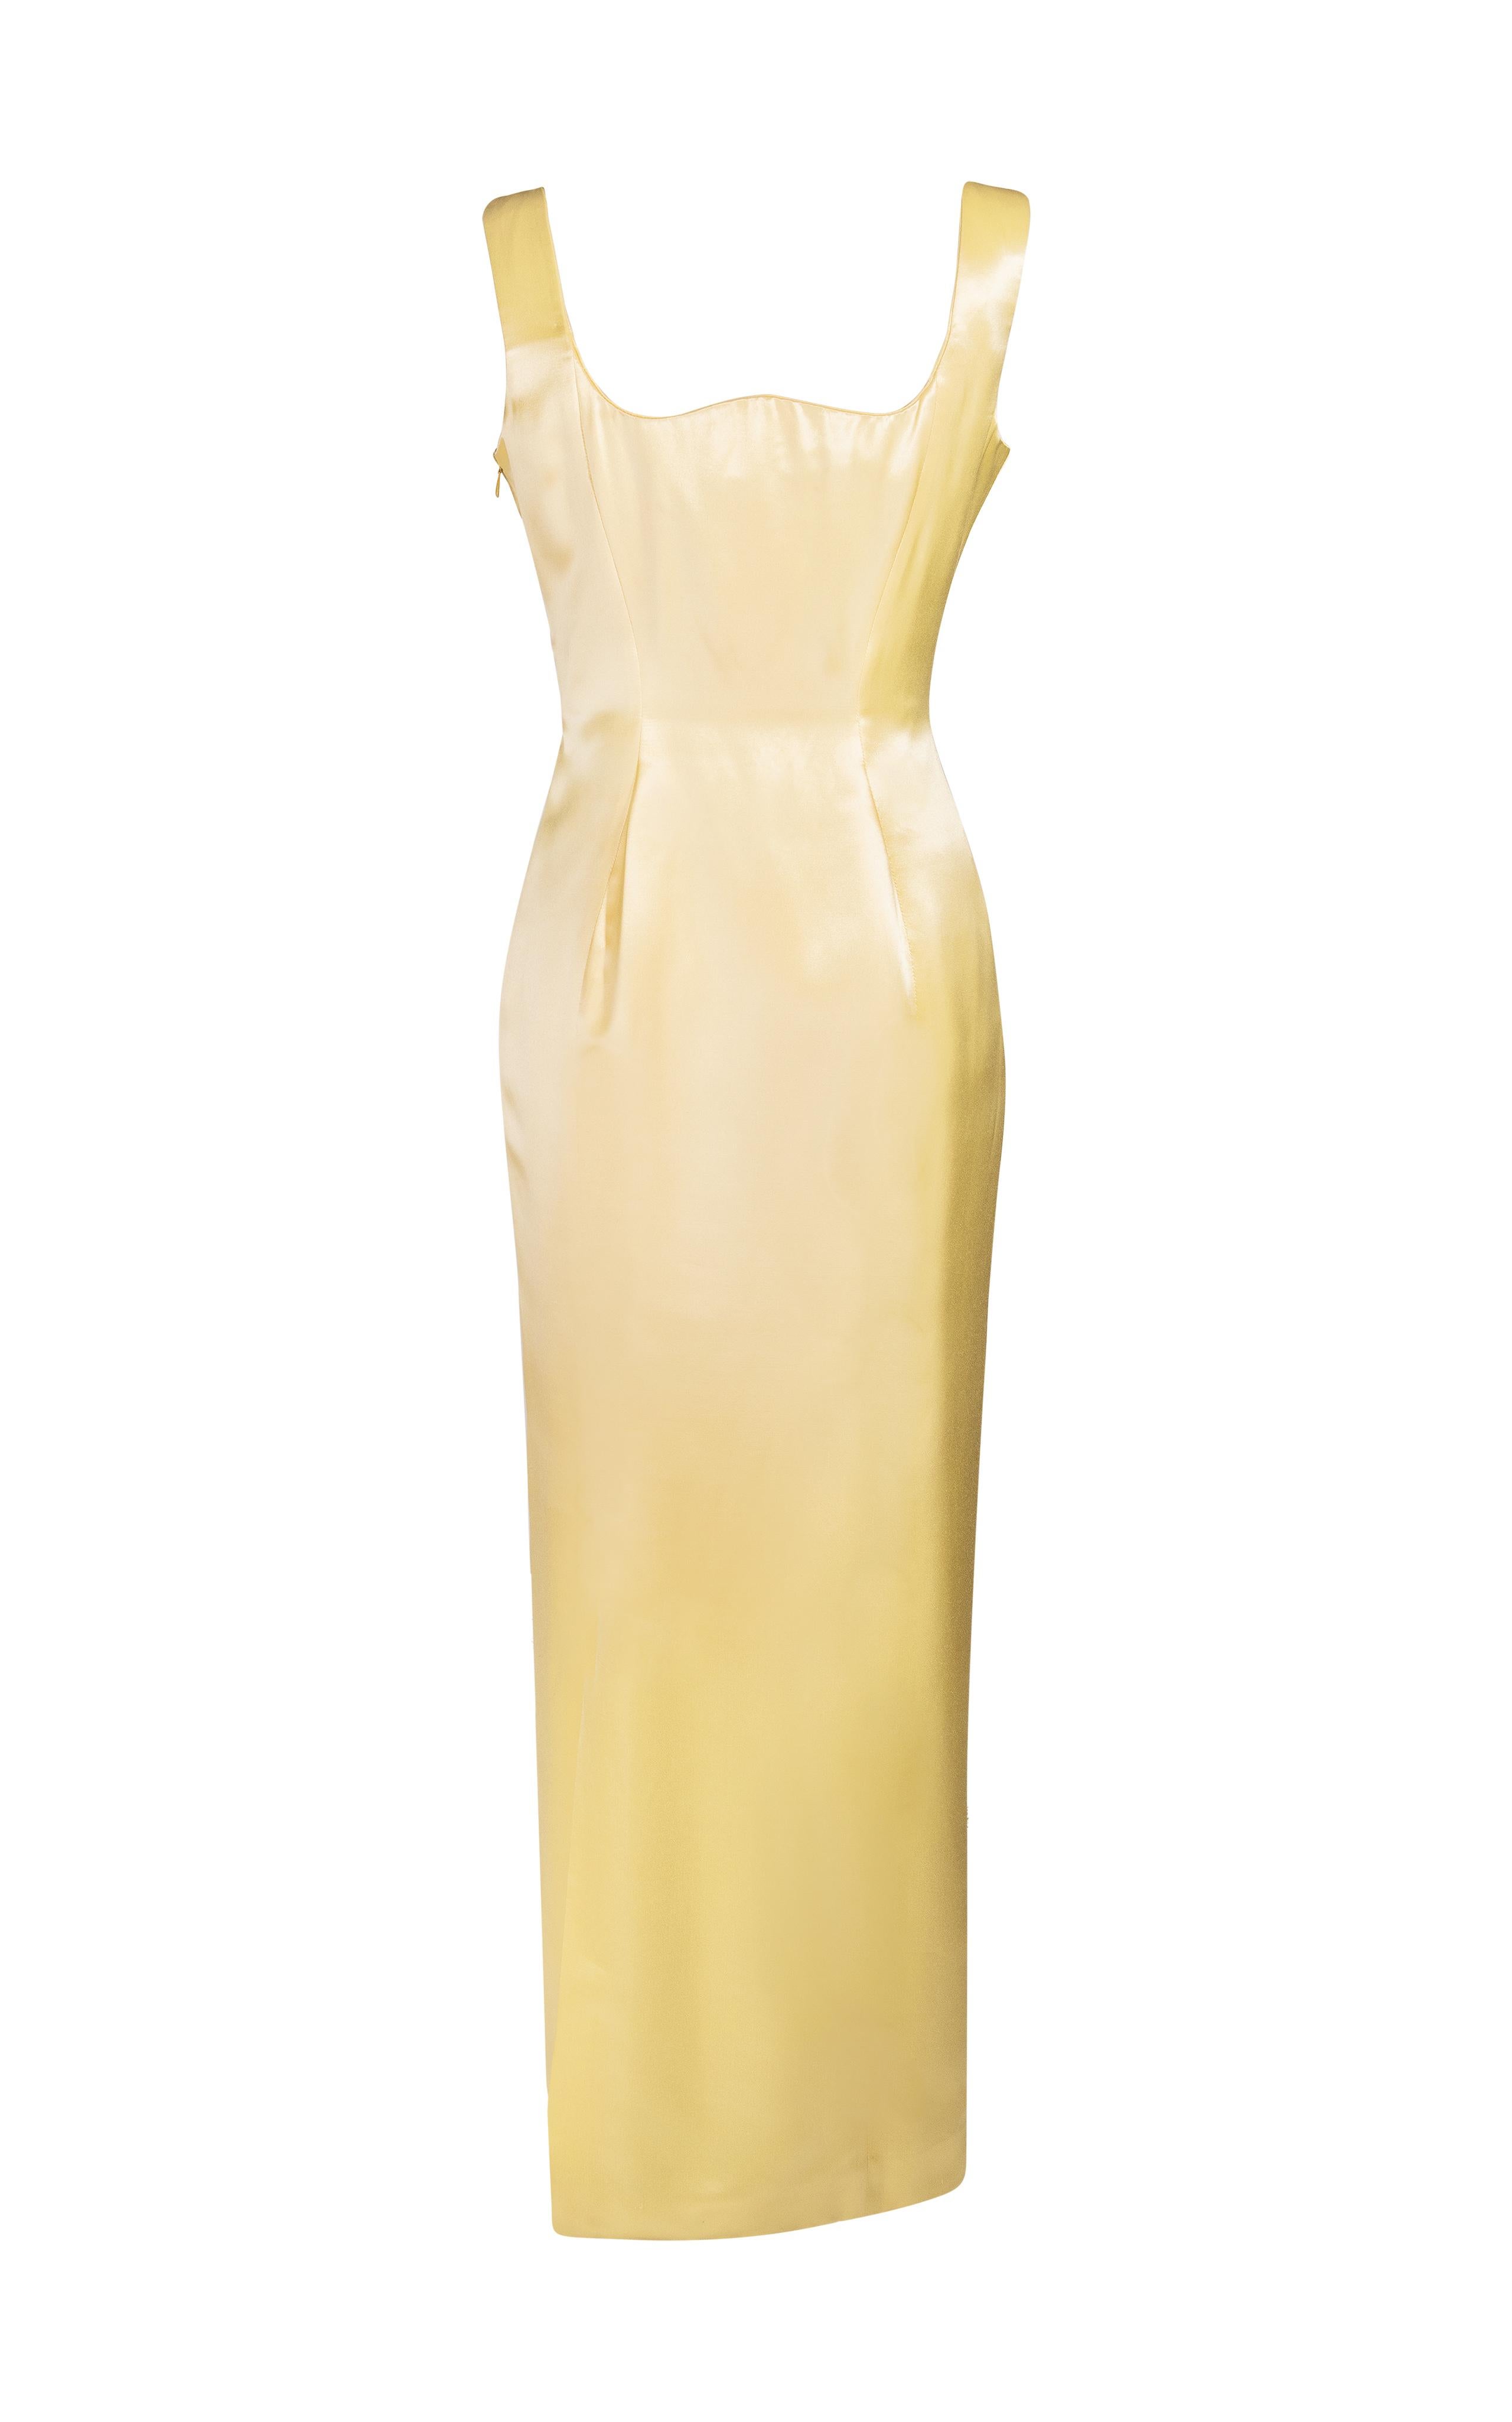 Women's A/W 1995 Gianni Versace Yellow Silk Gown with Curved Bust